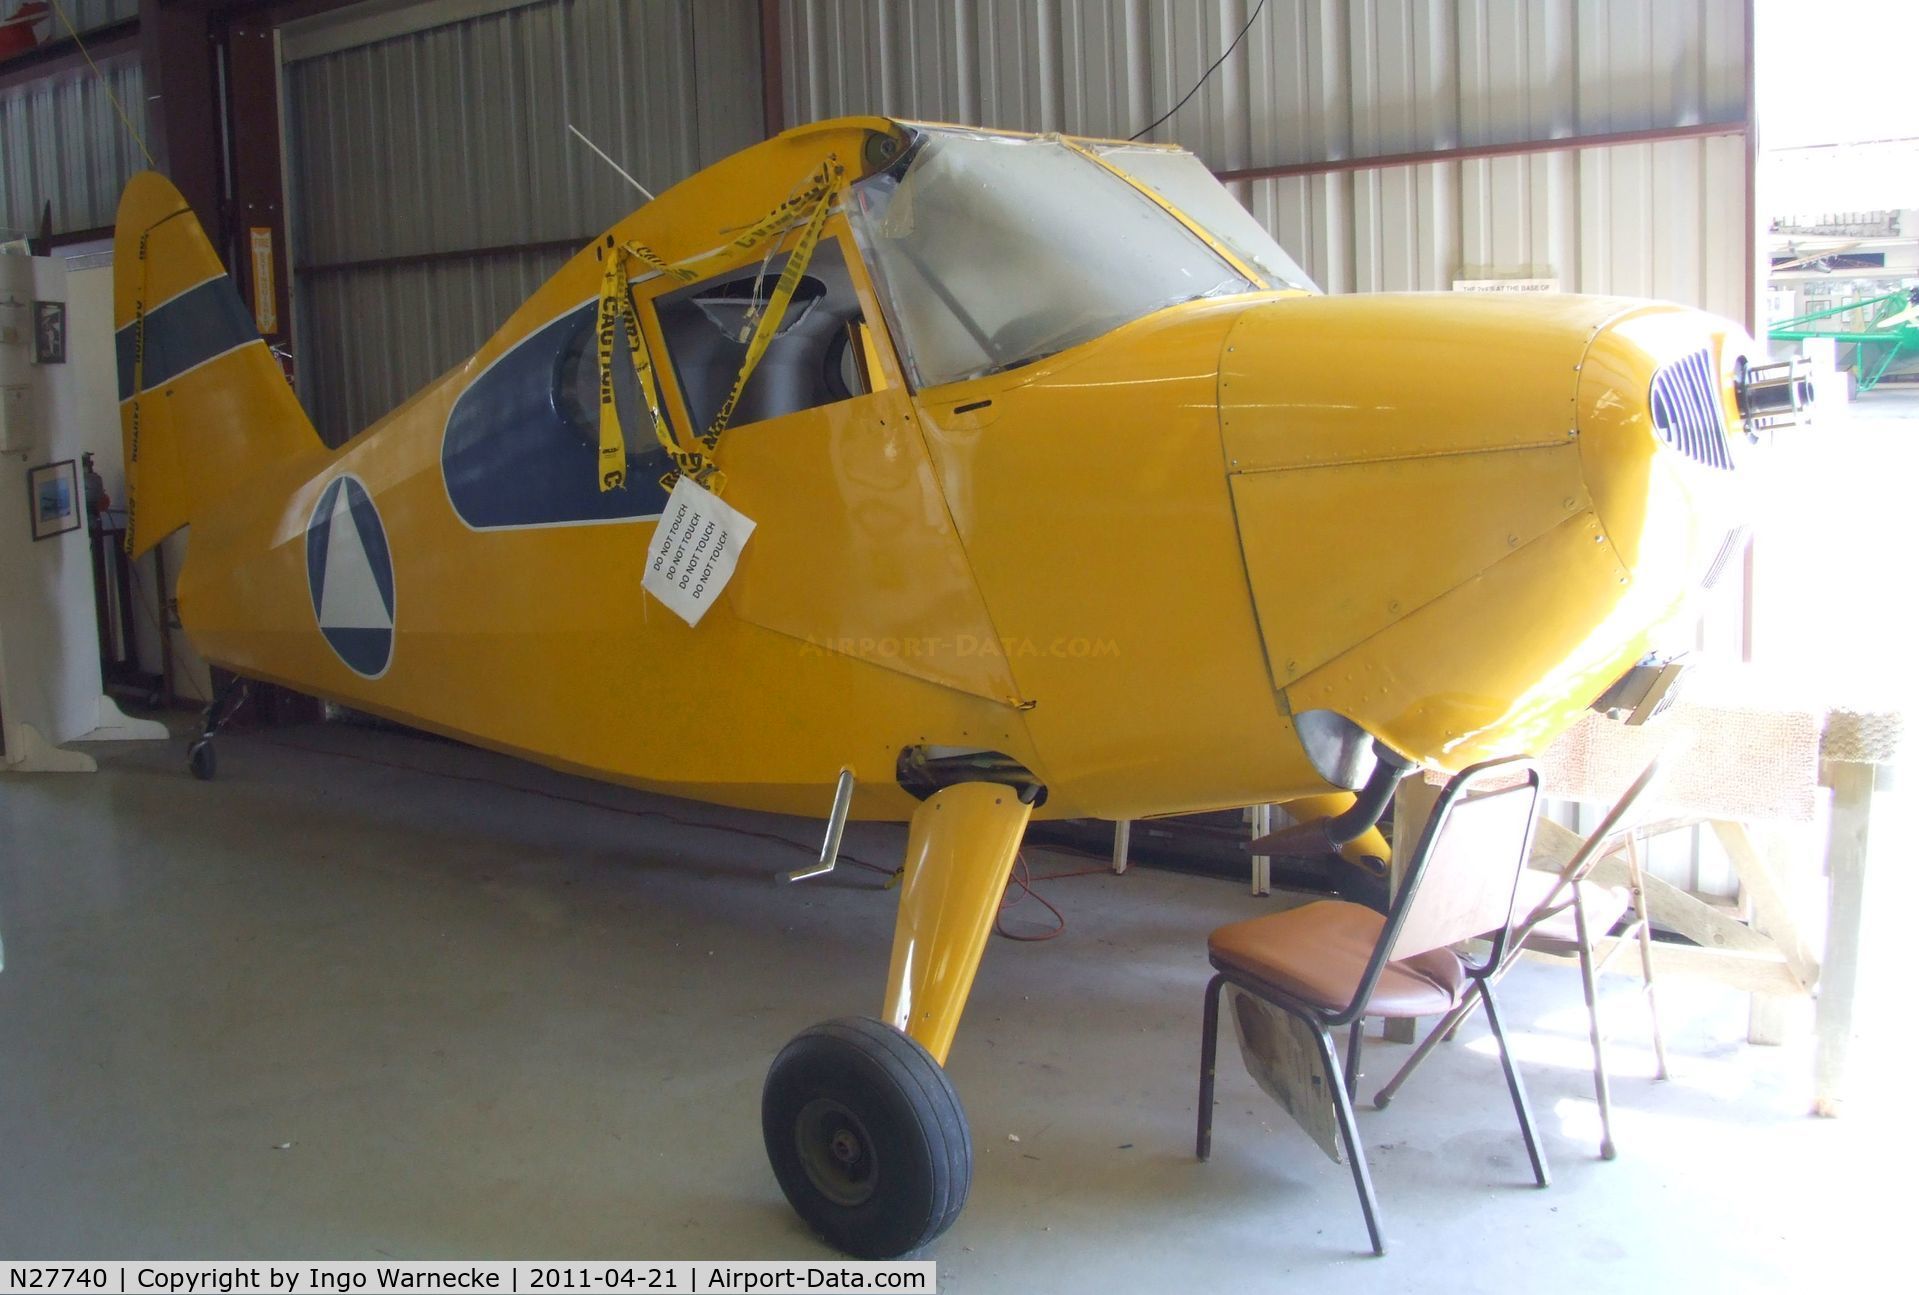 N27740, 1940 Stinson 10 C/N 7690, Stinson 10 (fuselage only) at the Wings of History Air Museum, San Martin CA